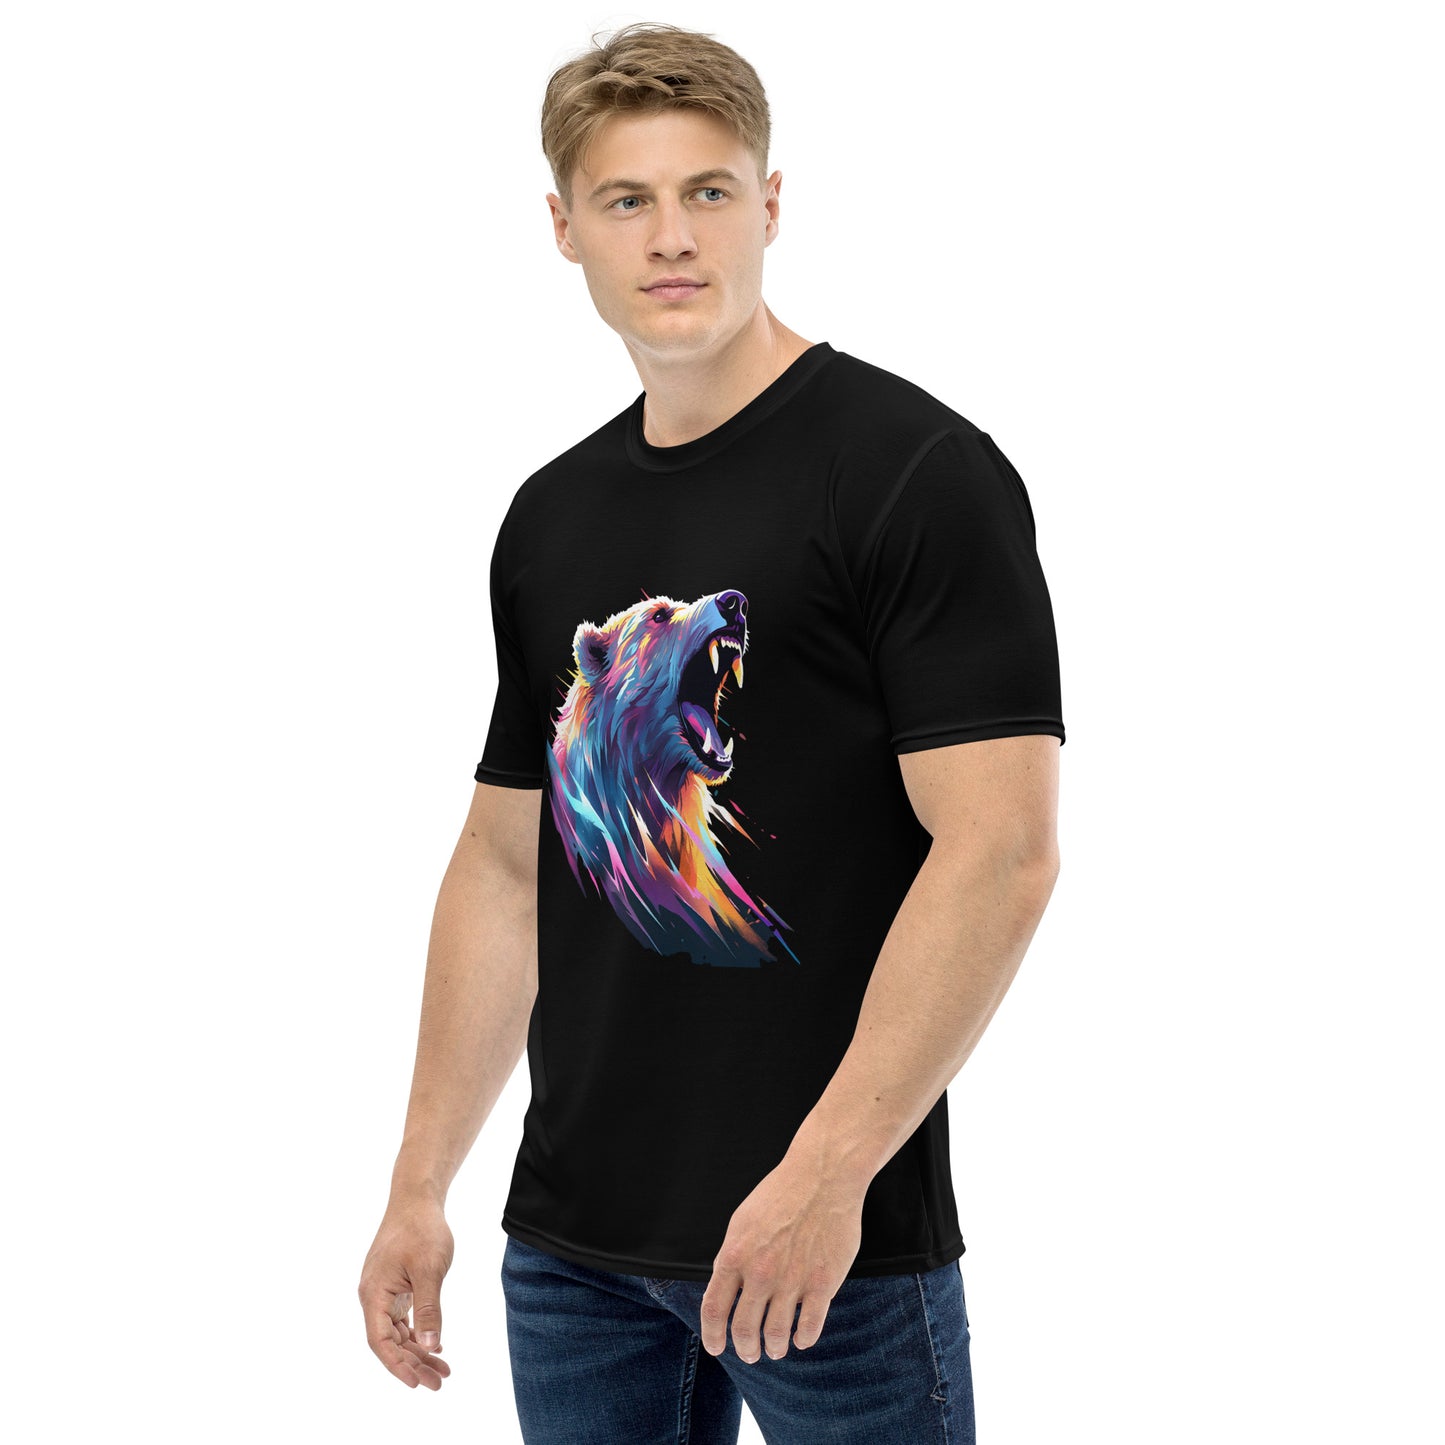 Neon Grizzly All Over Print Men's T-Shirt